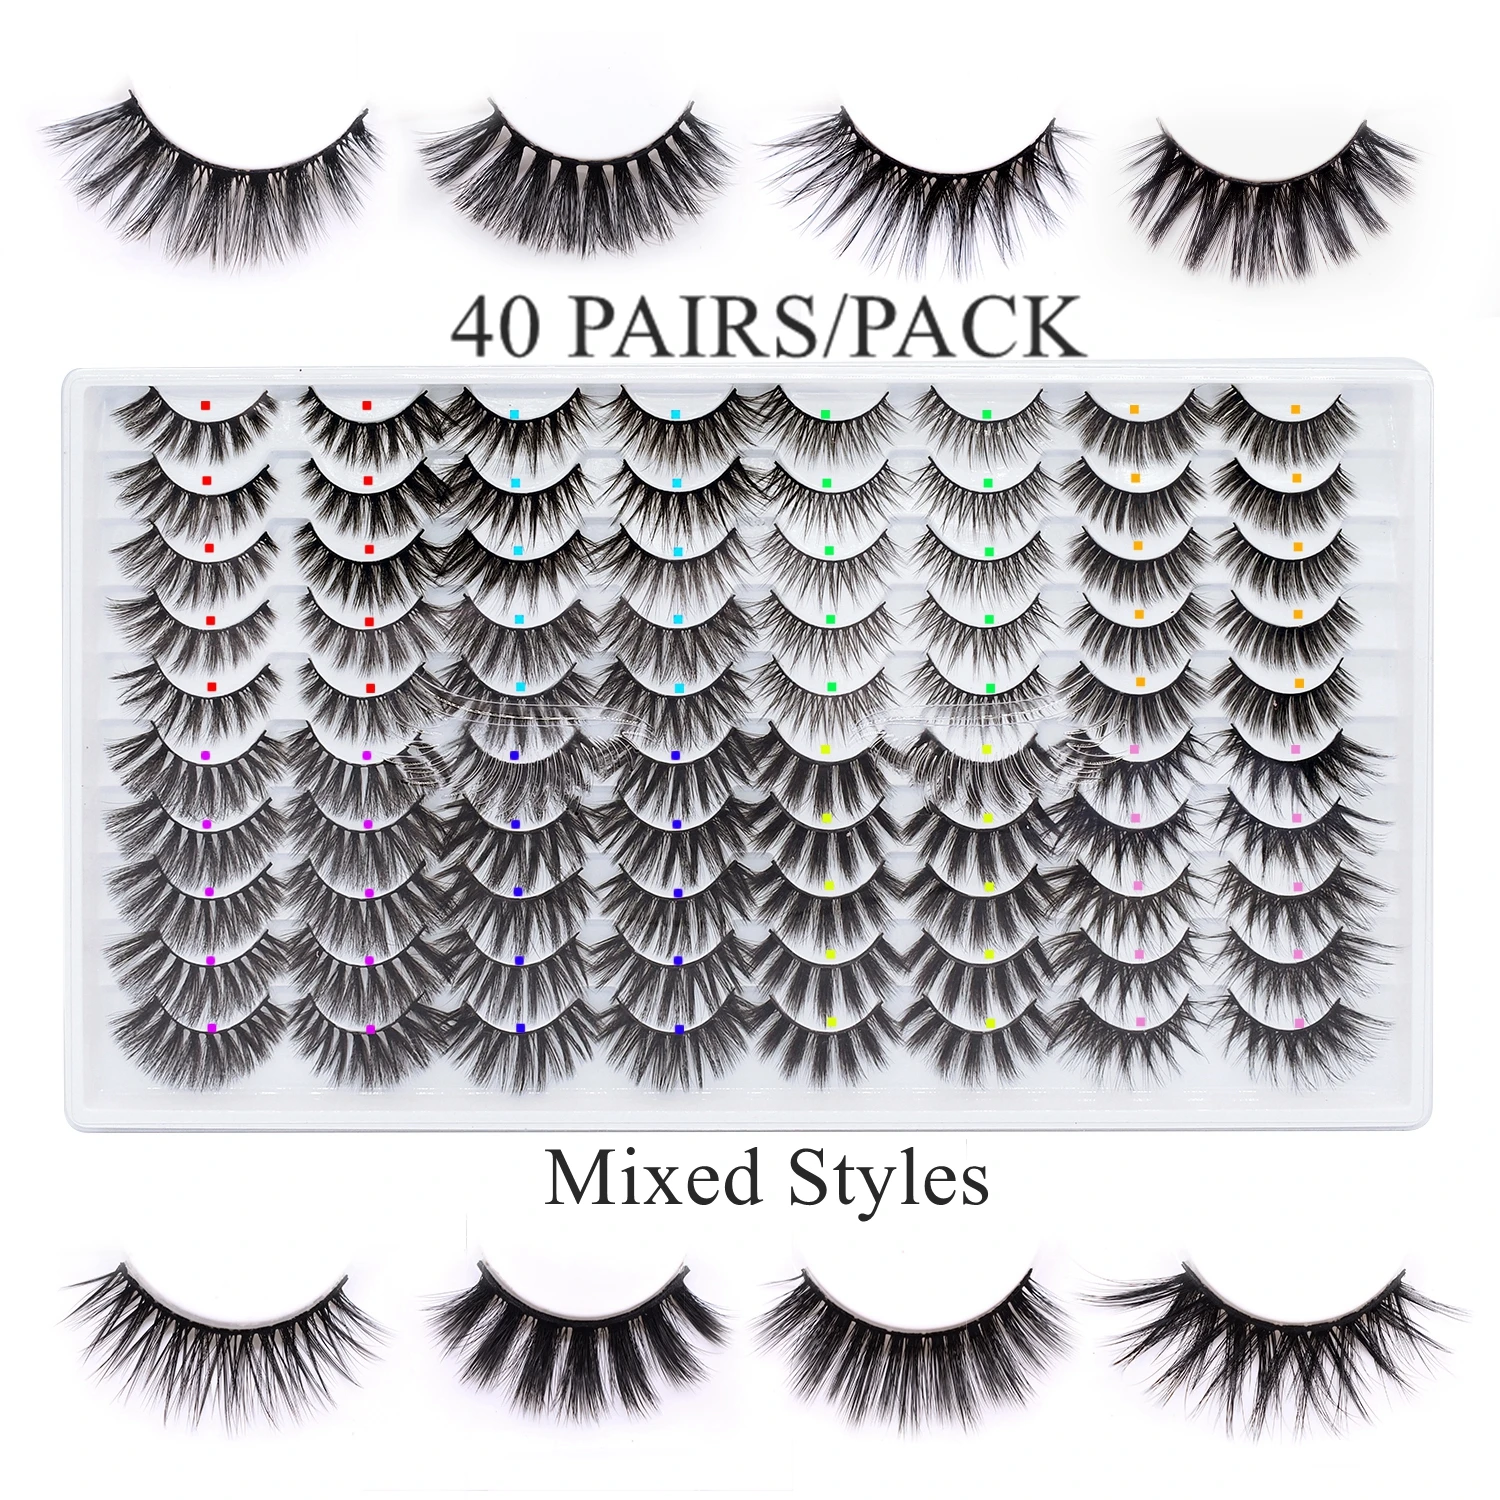 8/20/30/40 Pairs 3D Mink Lashes Pack Messy Fluffy Long Faux Cils Packaging Wholesale in Lots,Mix Dramatic Natrual Mink Eyelashes